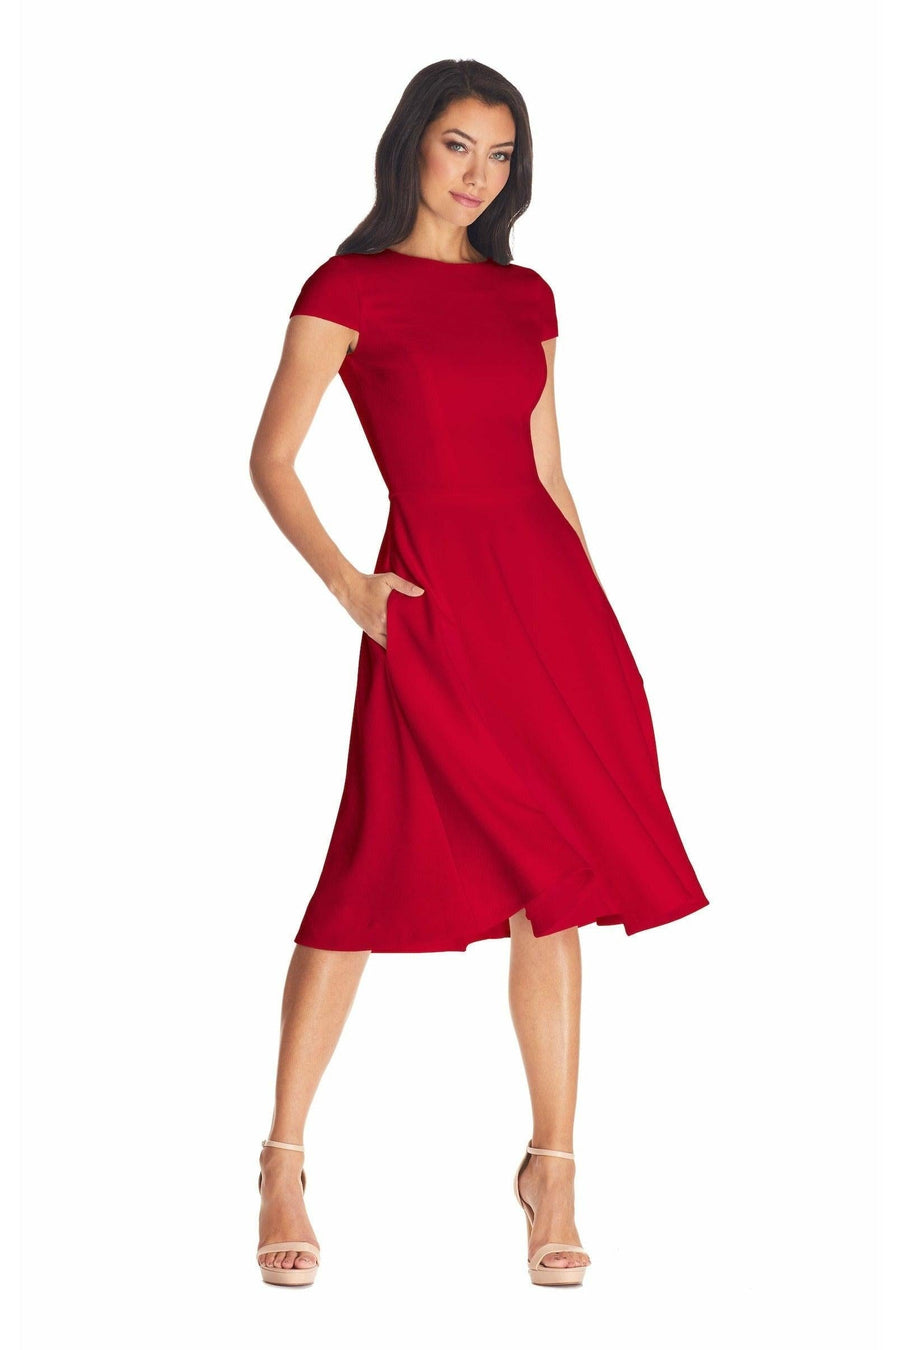 london belly Women Fit and Flare Red Dress - Buy london belly Women Fit and Flare  Red Dress Online at Best Prices in India | Flipkart.com